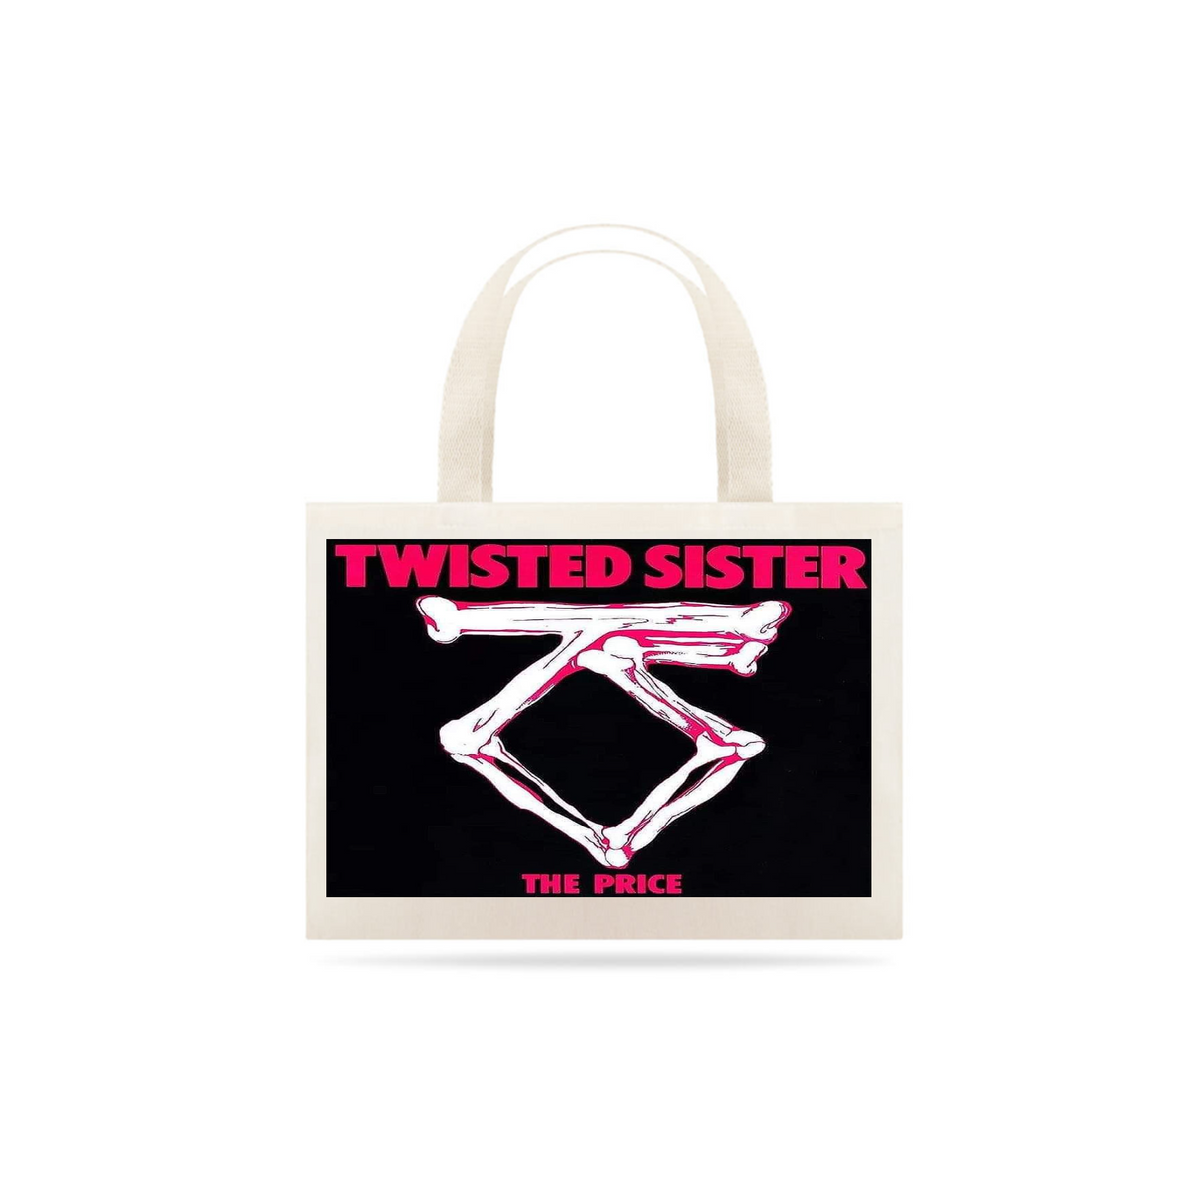 Nome do produto: Twisted Sister - The Price